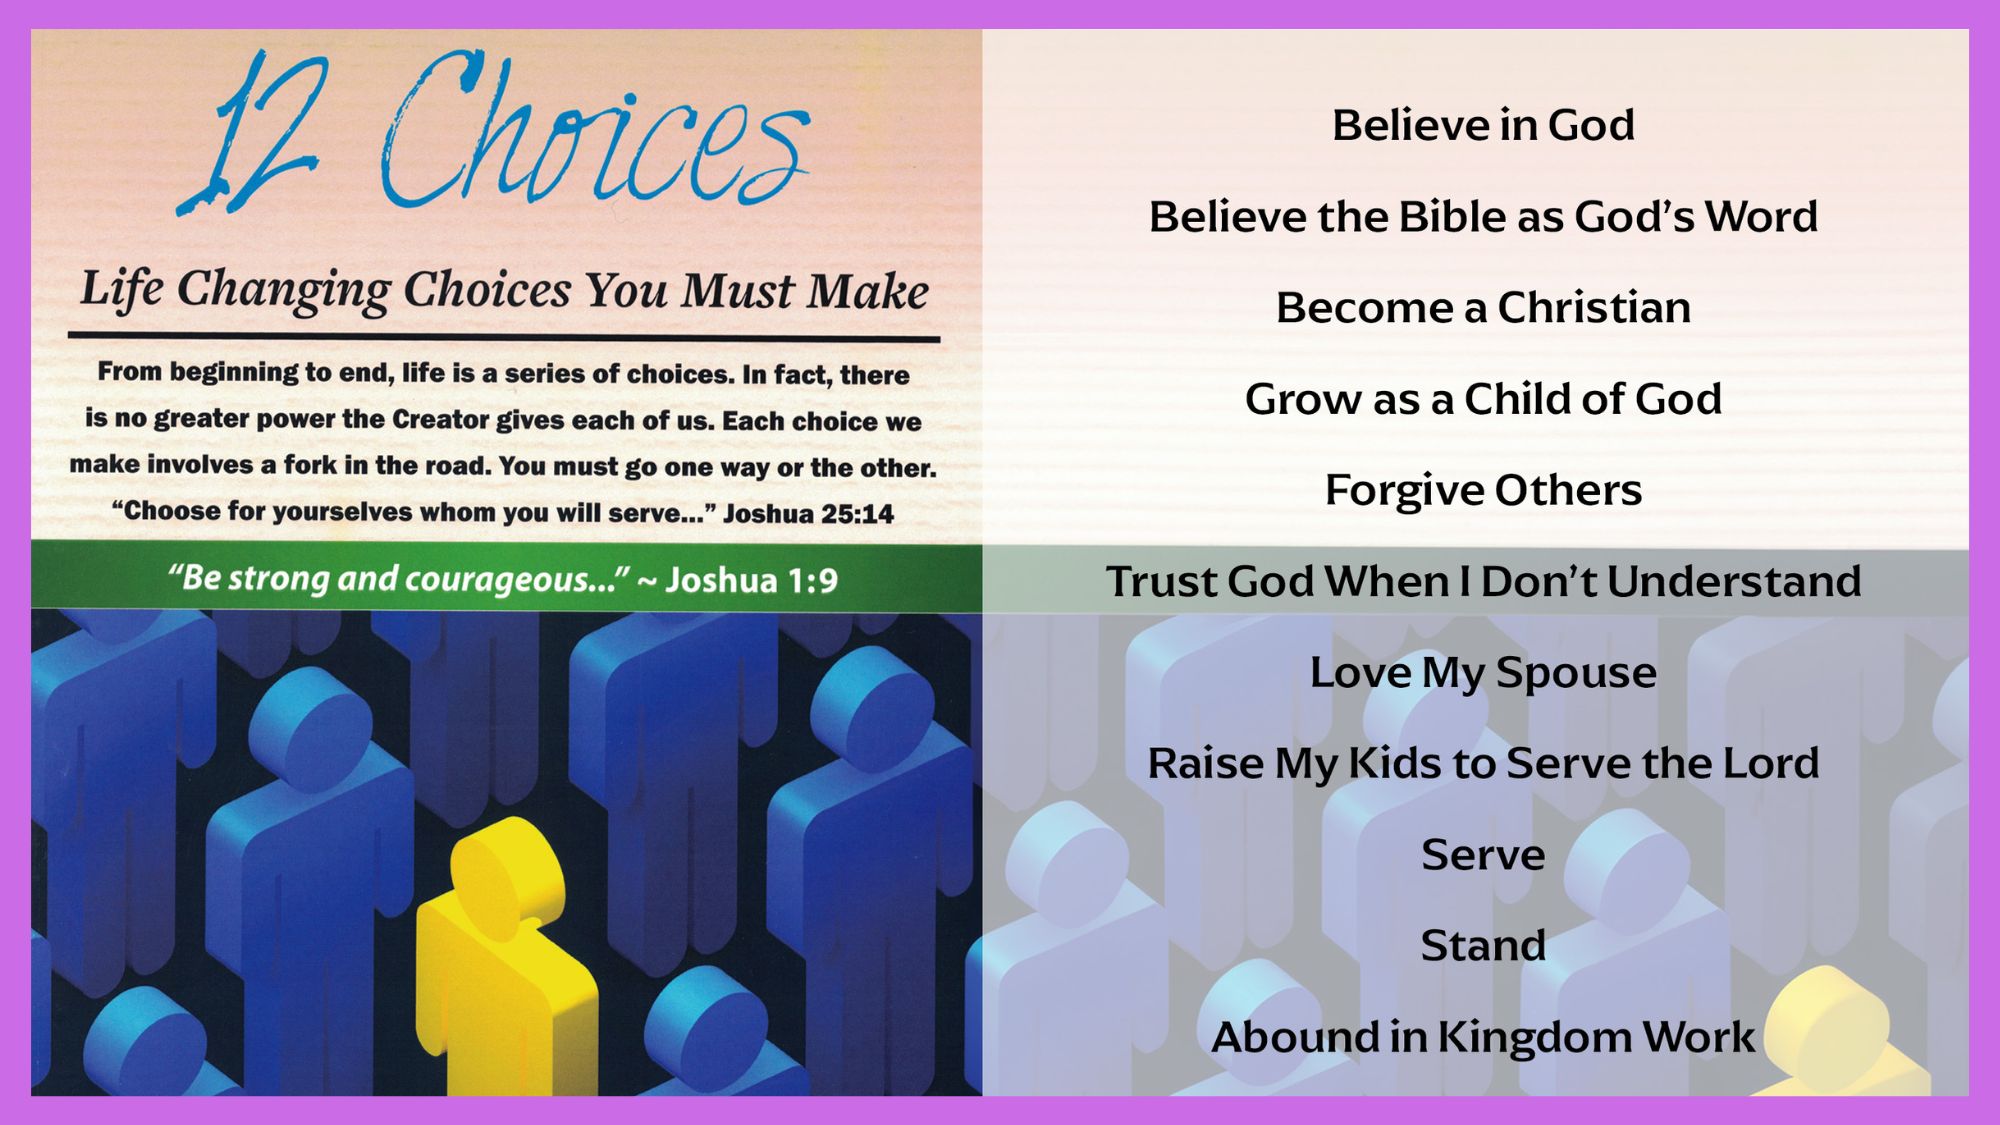 12 Choices - Life Changing Choices You Must Make: Choice # 12 Finish Strong, and Go to Heaven